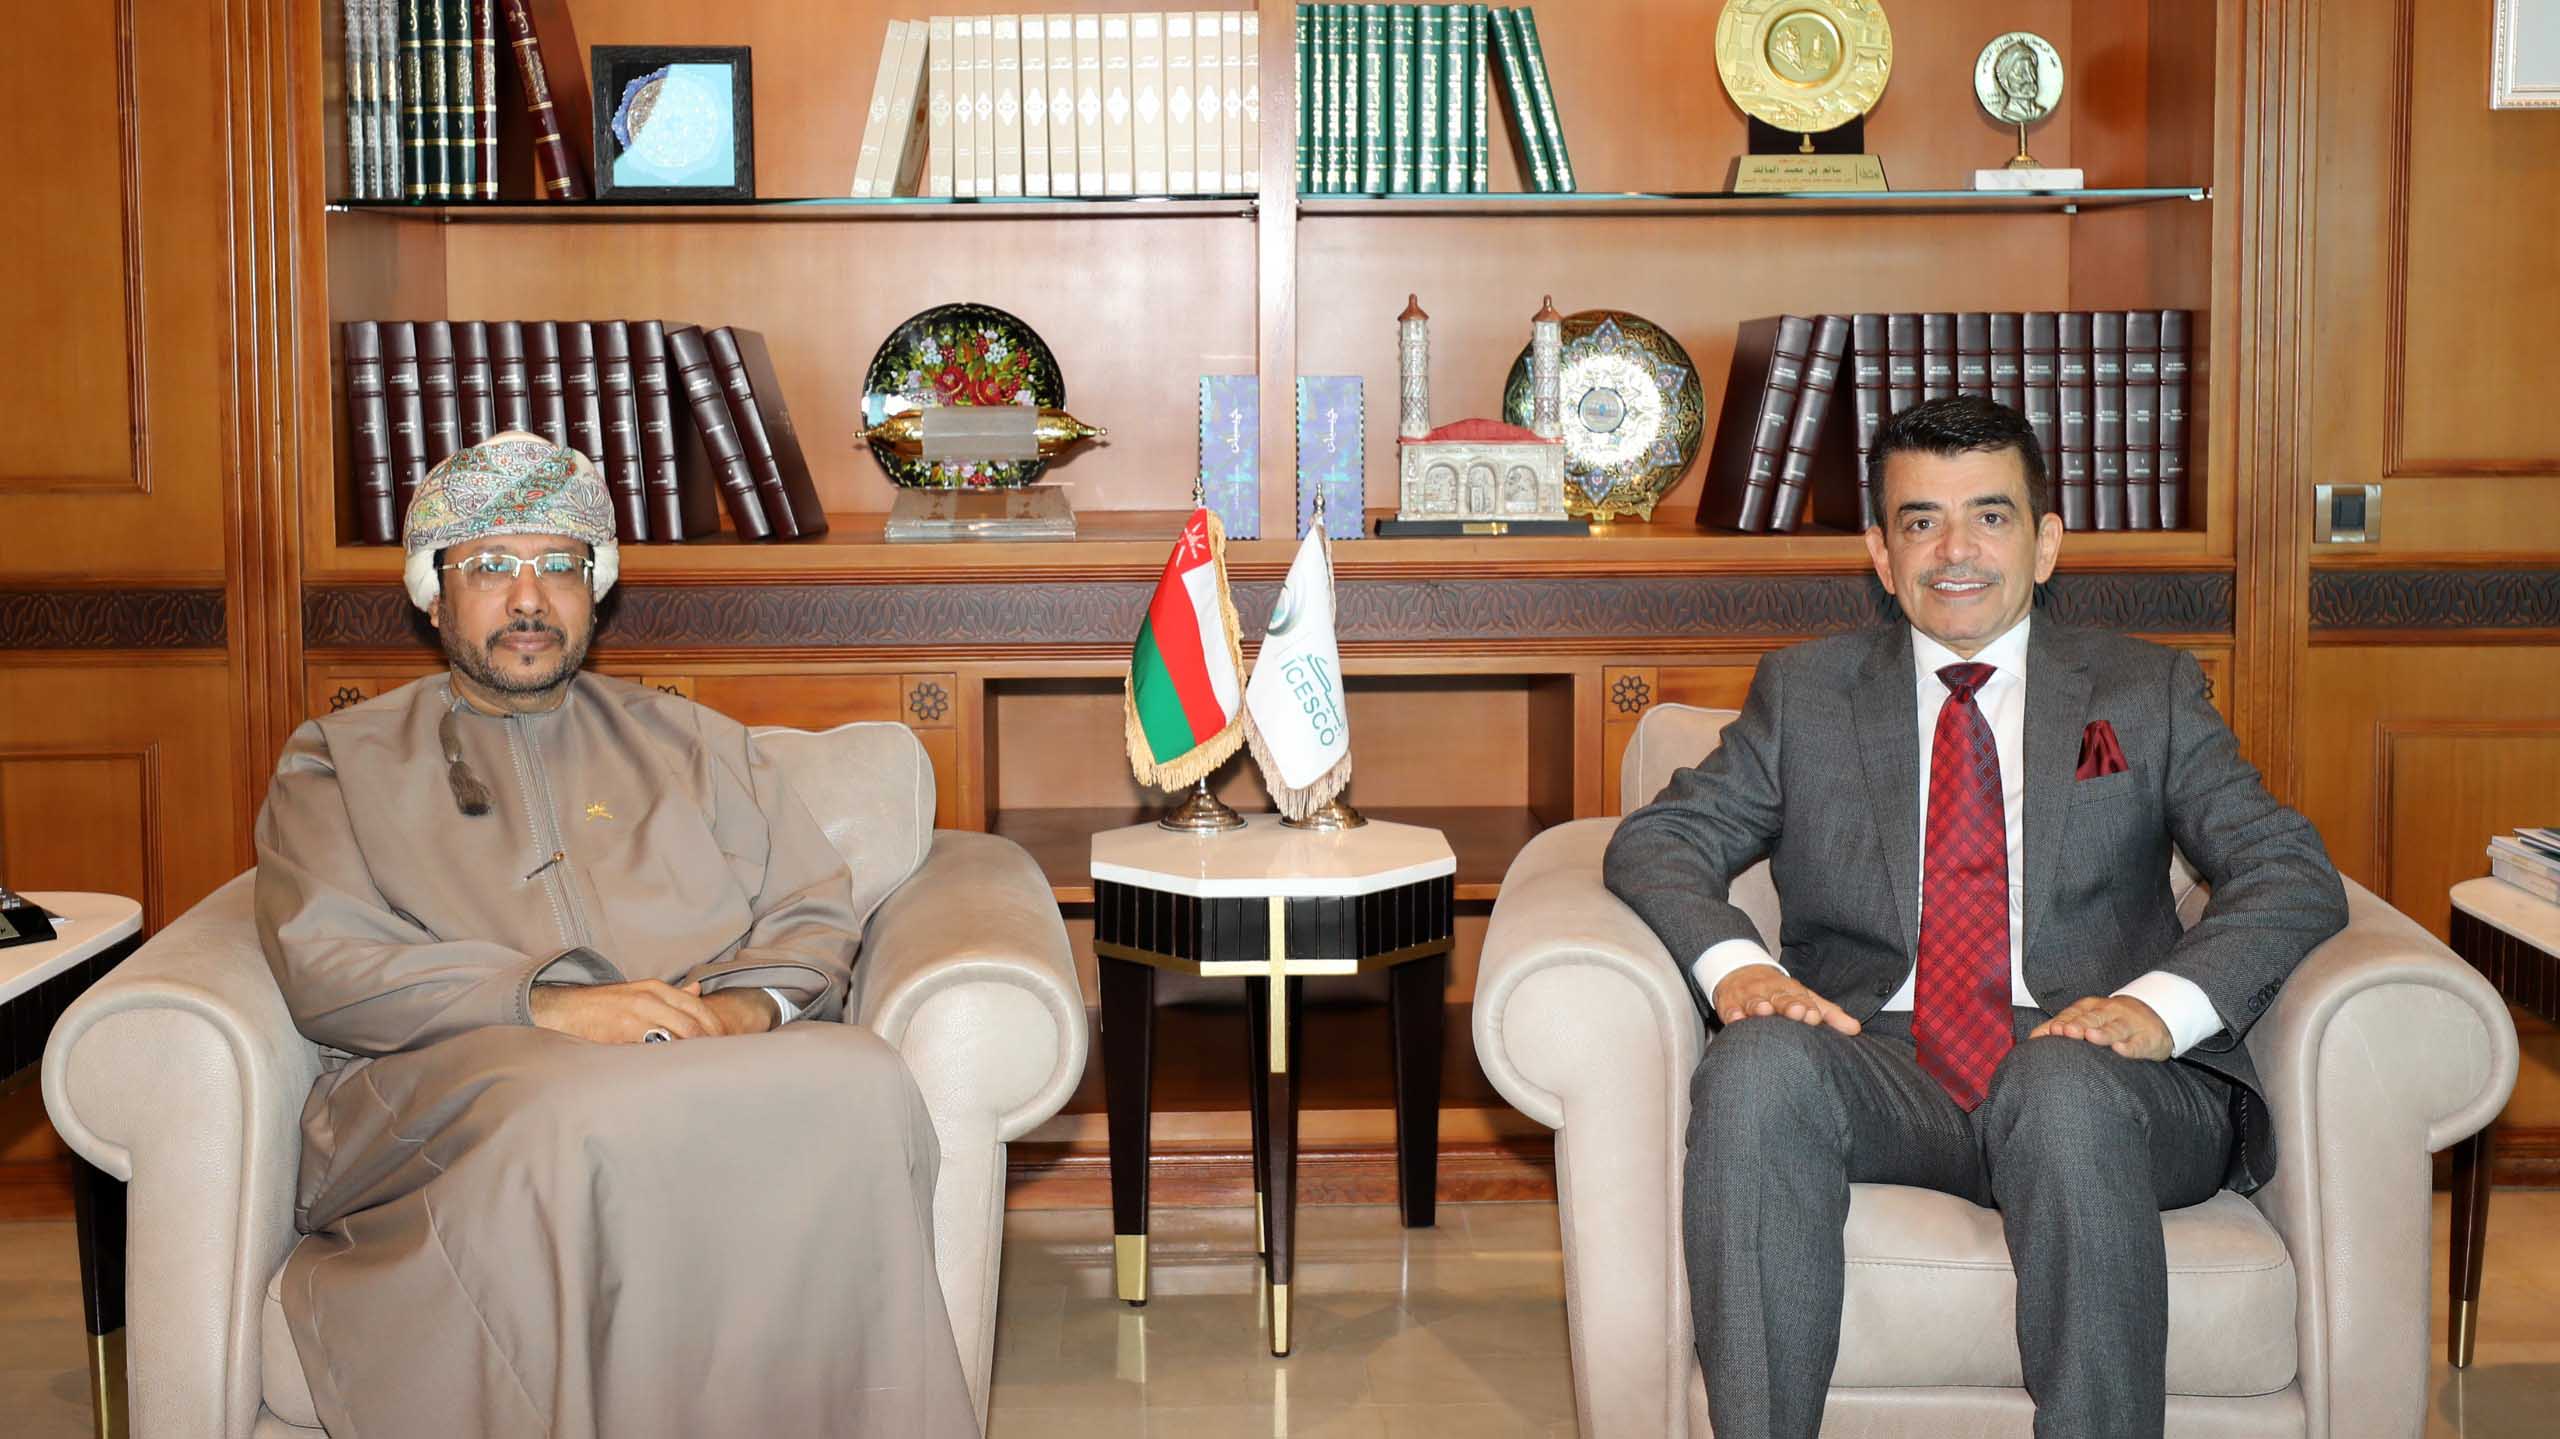 ICESCO Director-General Receives the Ambassador of the Sultanate of Oman in Rabat